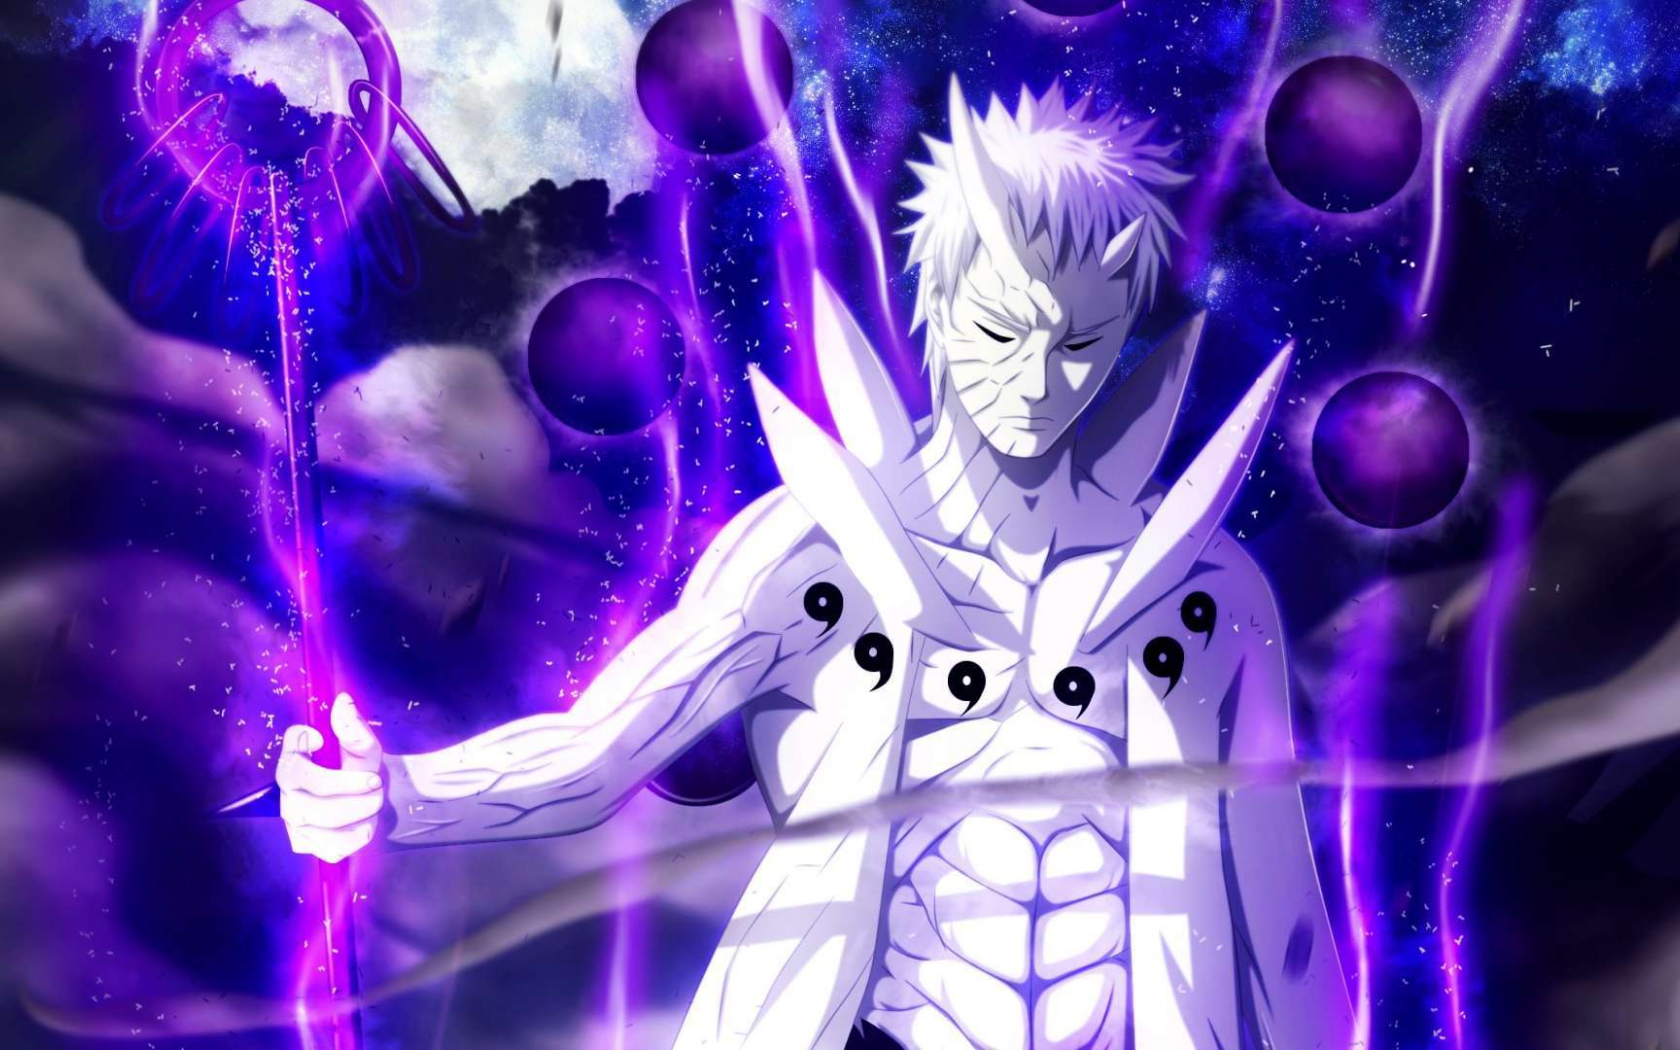 Free download 1080p Anime Wallpaper Download Obito Six Paths Madara [1920x1080] for your Desktop, Mobile & Tablet. Explore Cool Anime Purple Wallpaper. Cool Purple Background, Cool Purple Wallpaper, Cool Purple Wallpaper